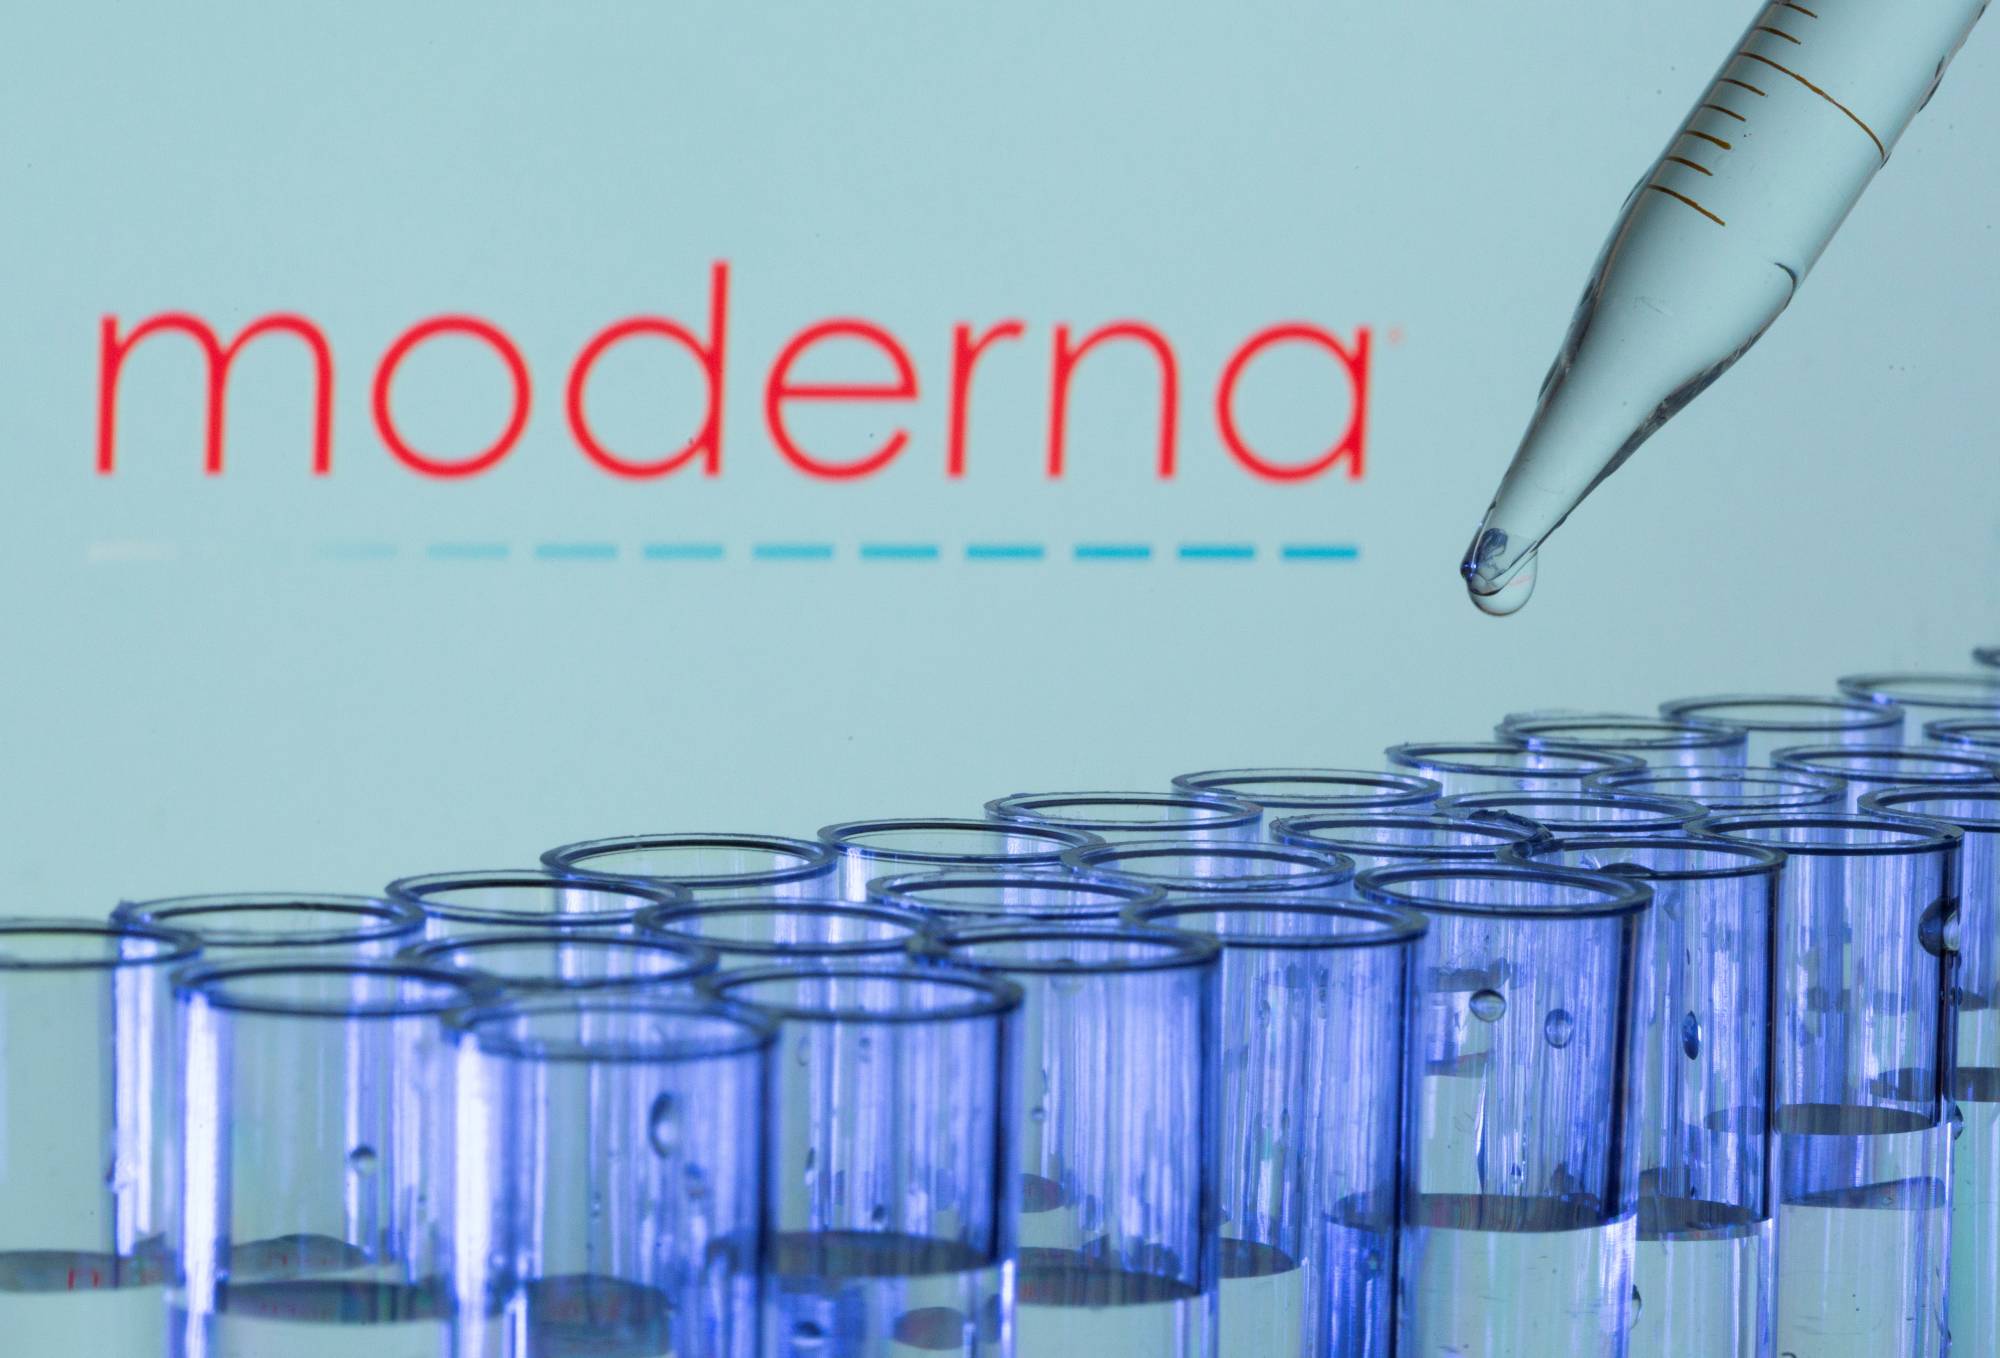 Japan's Takeda Pharmaceutical Co. said Tuesday it will import an additional 50 million doses of U.S. developer Moderna Inc.'s coronavirus vaccine from as early as the beginning of 2022, in a move that could help speed up inoculation efforts in the country. | REUTERS